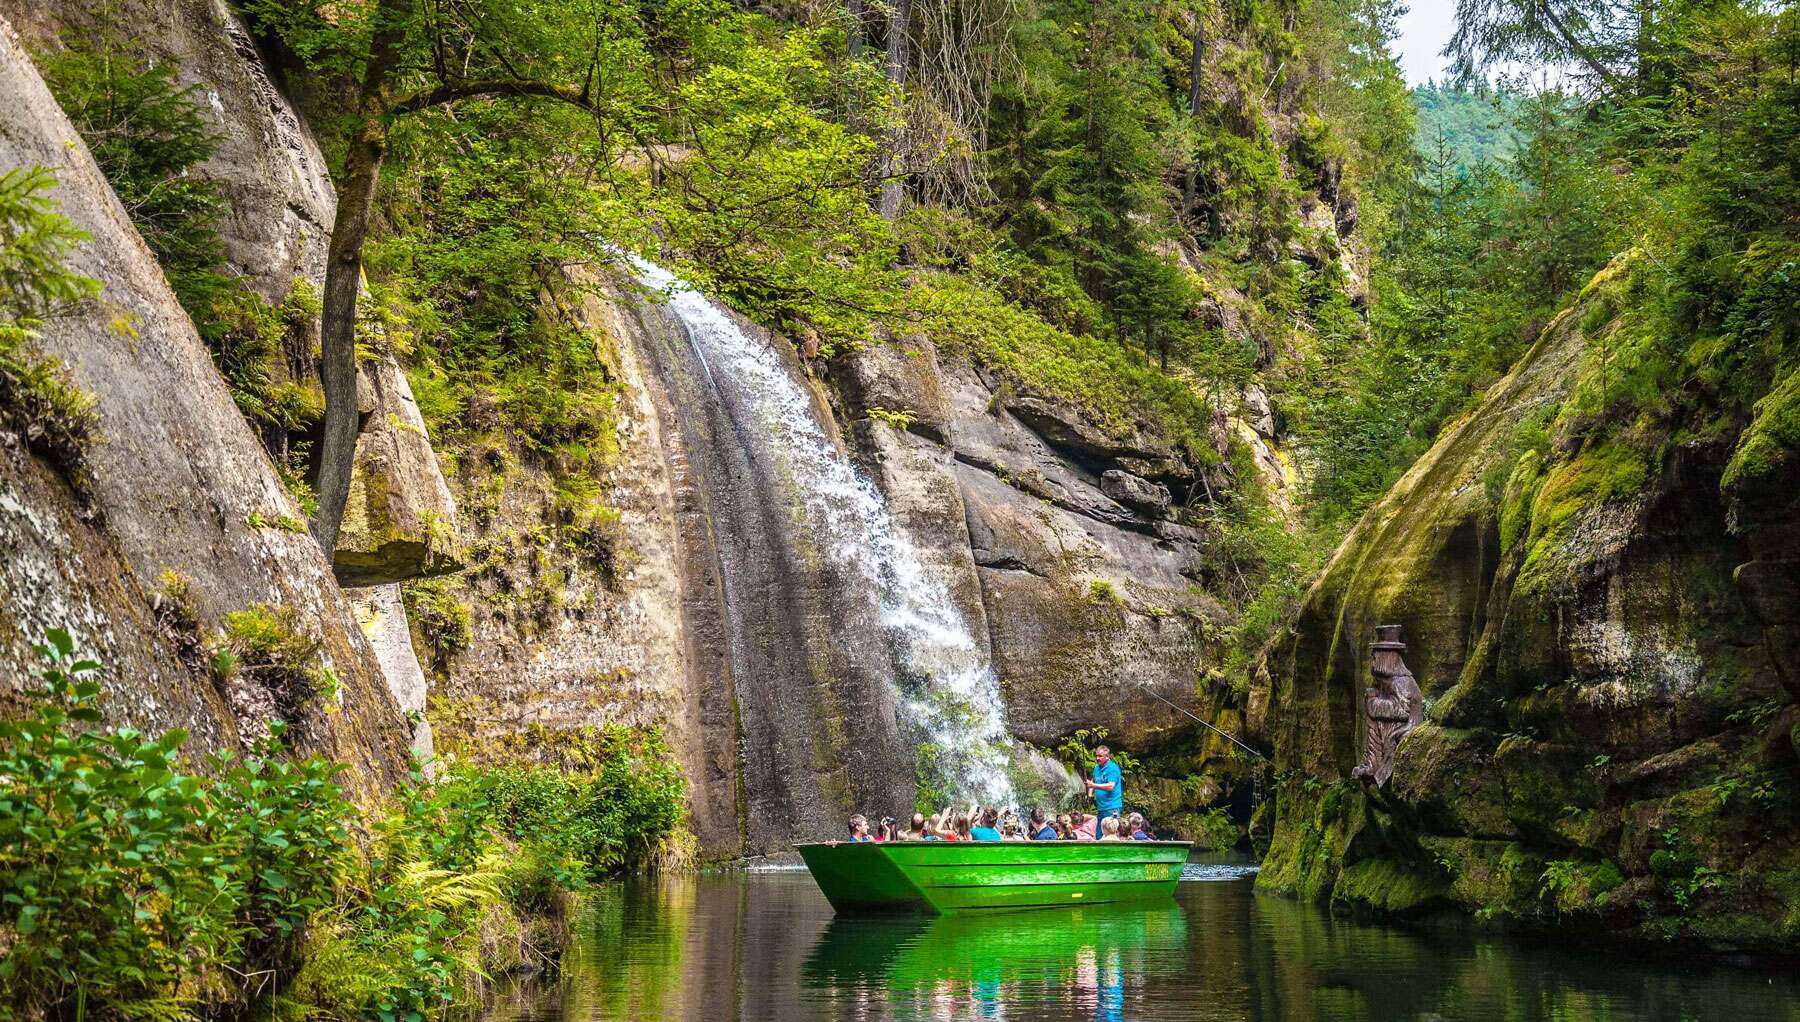 9.30 AM – 12.30 PM: Bohemian Switzerland-Boat Ride in Gorges of Kamenice River